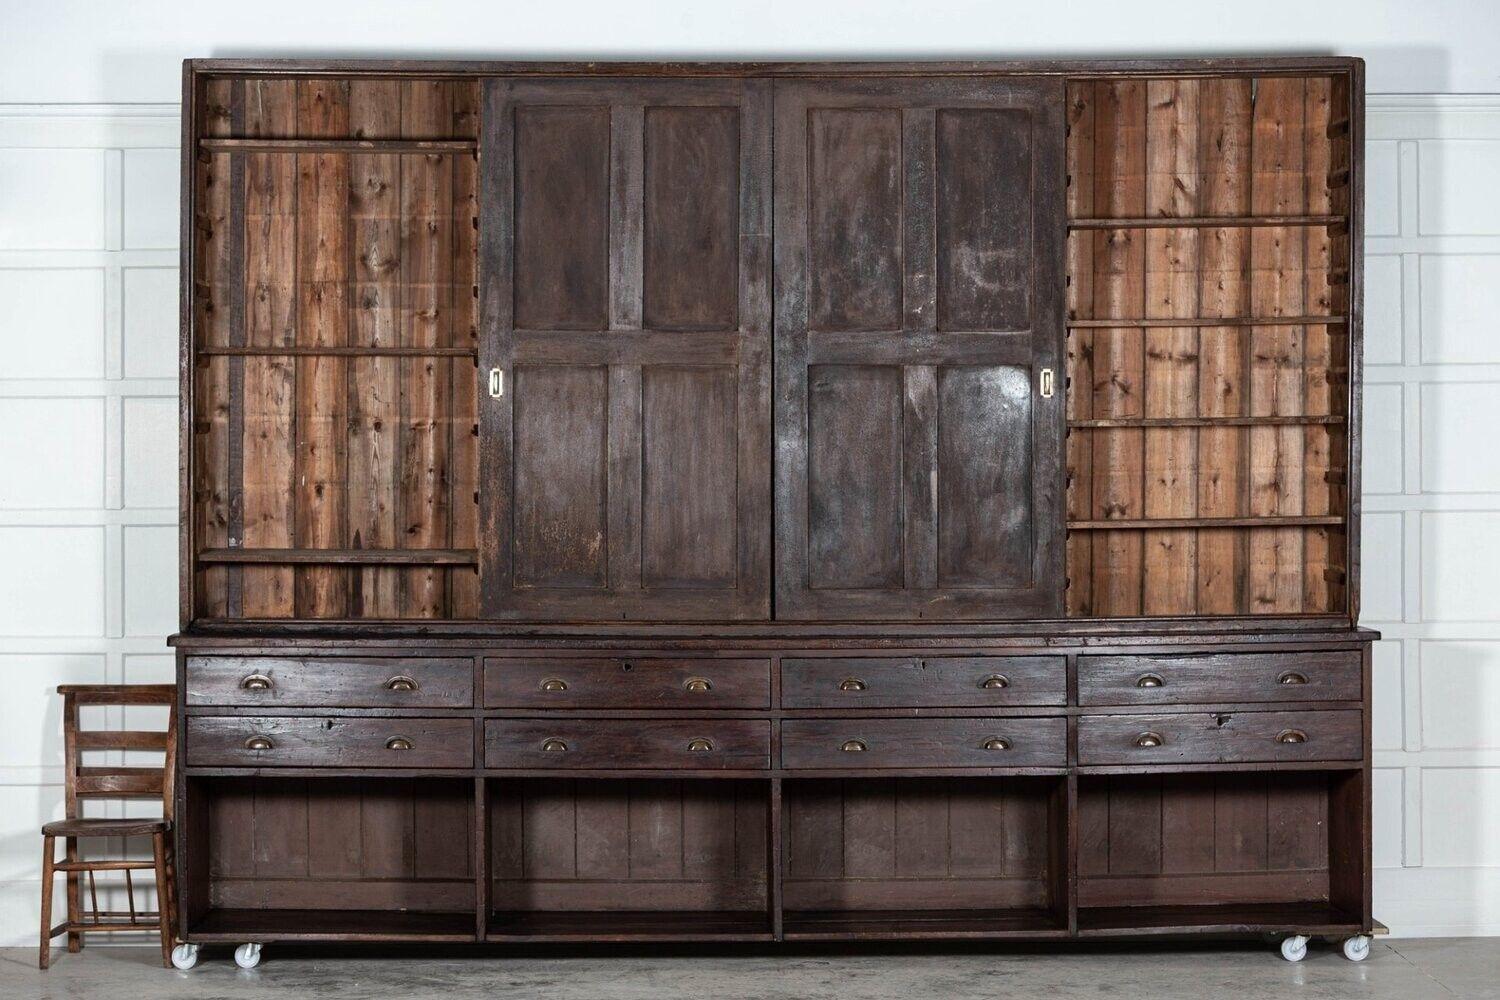 circa 1850
Monumental 19thC English Pine Housekeepers / Haberdashery Cabinet
Exceptional form and scale
sku 1161
W360 x D63 x H262 cm
Top W356 x D41 x H172 cm
Base W360 x D63 x H90 cm.